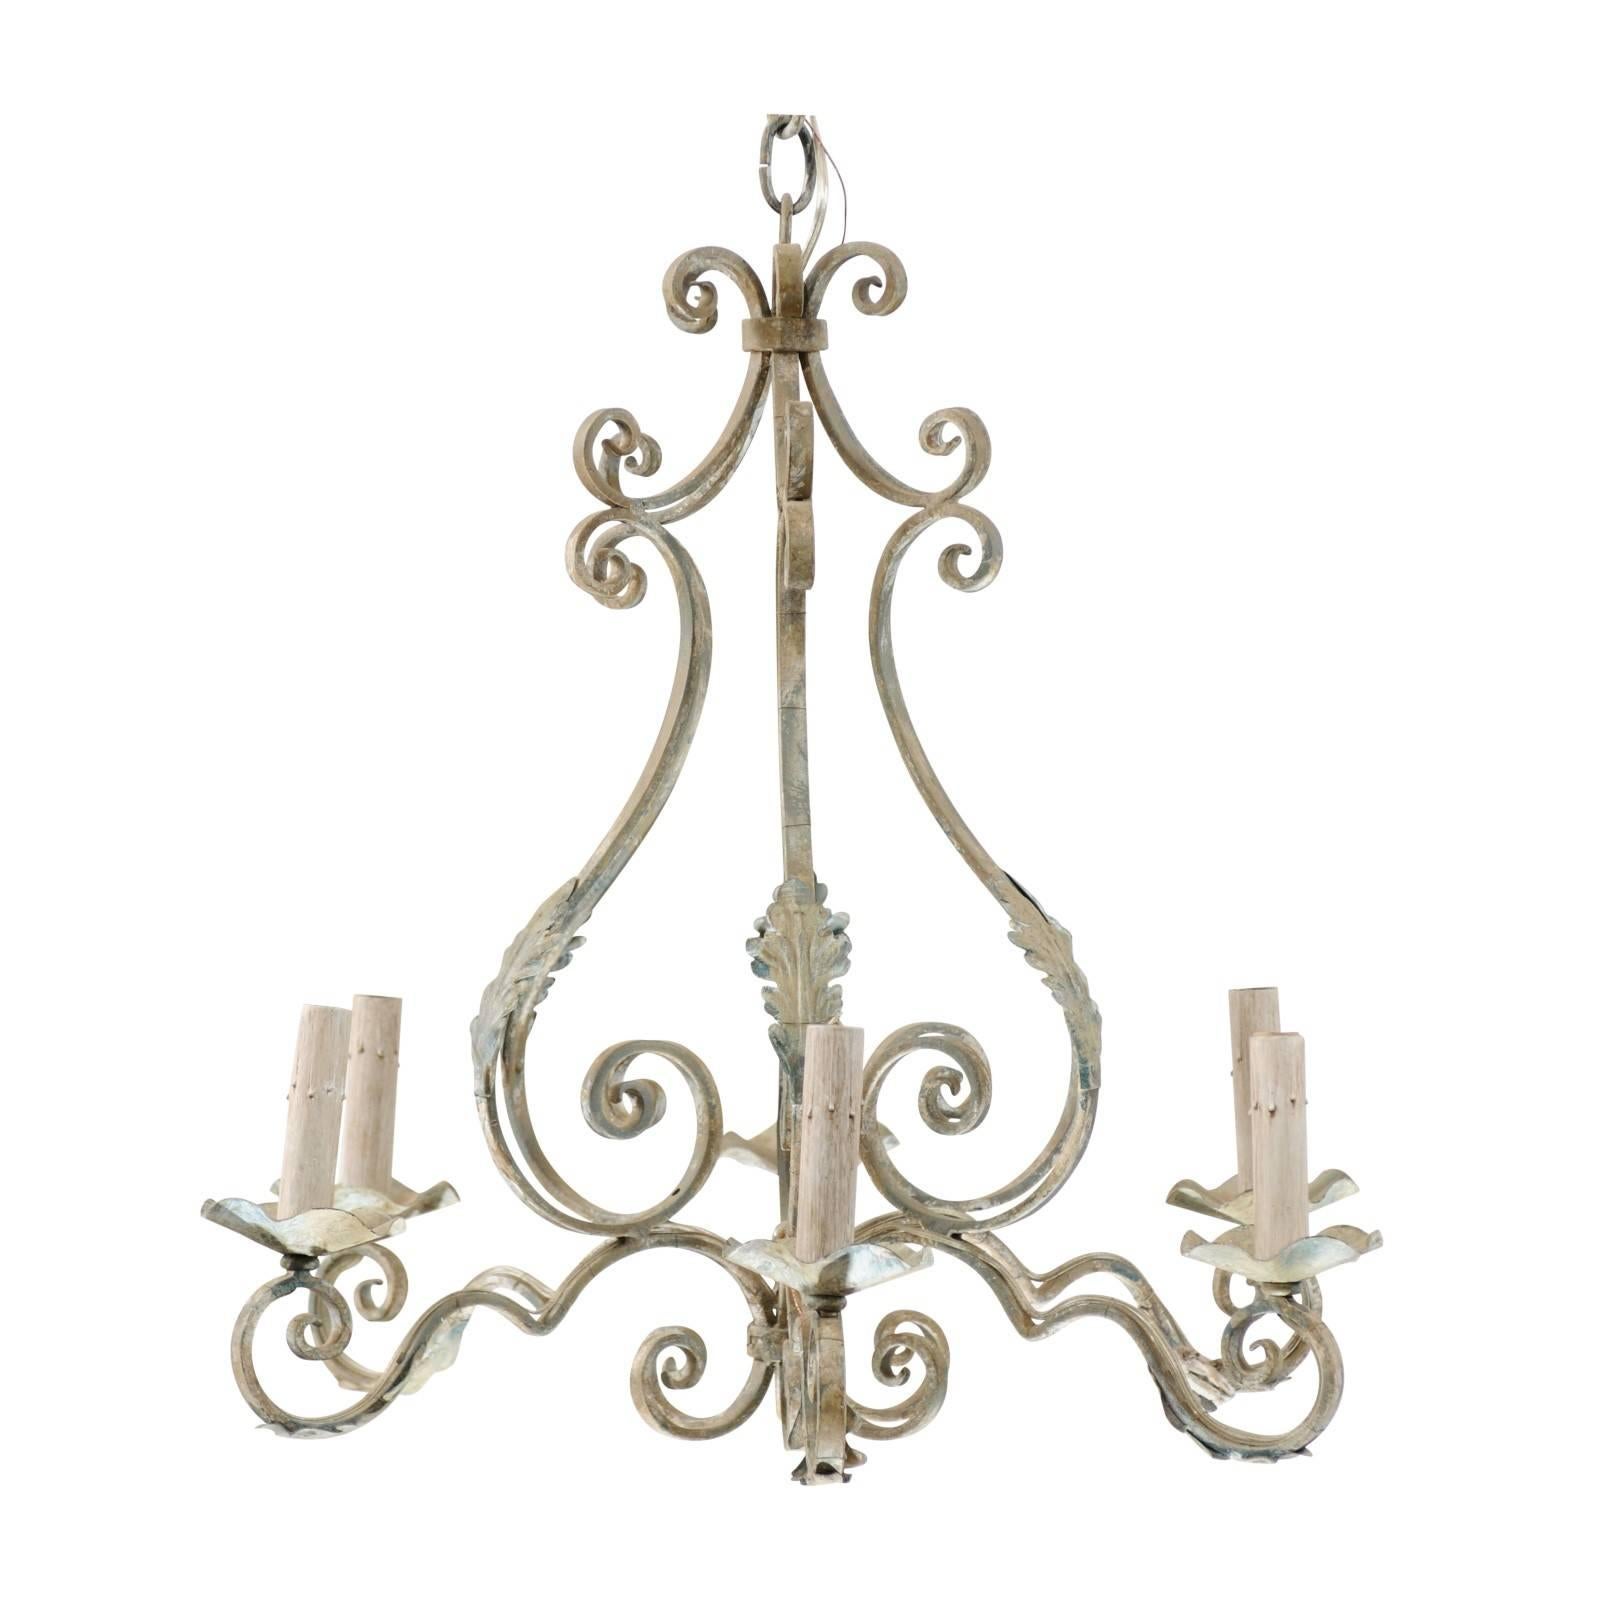 French Six-Light Pear Shaped Painted Iron Chandelier with Ornate Scrolls